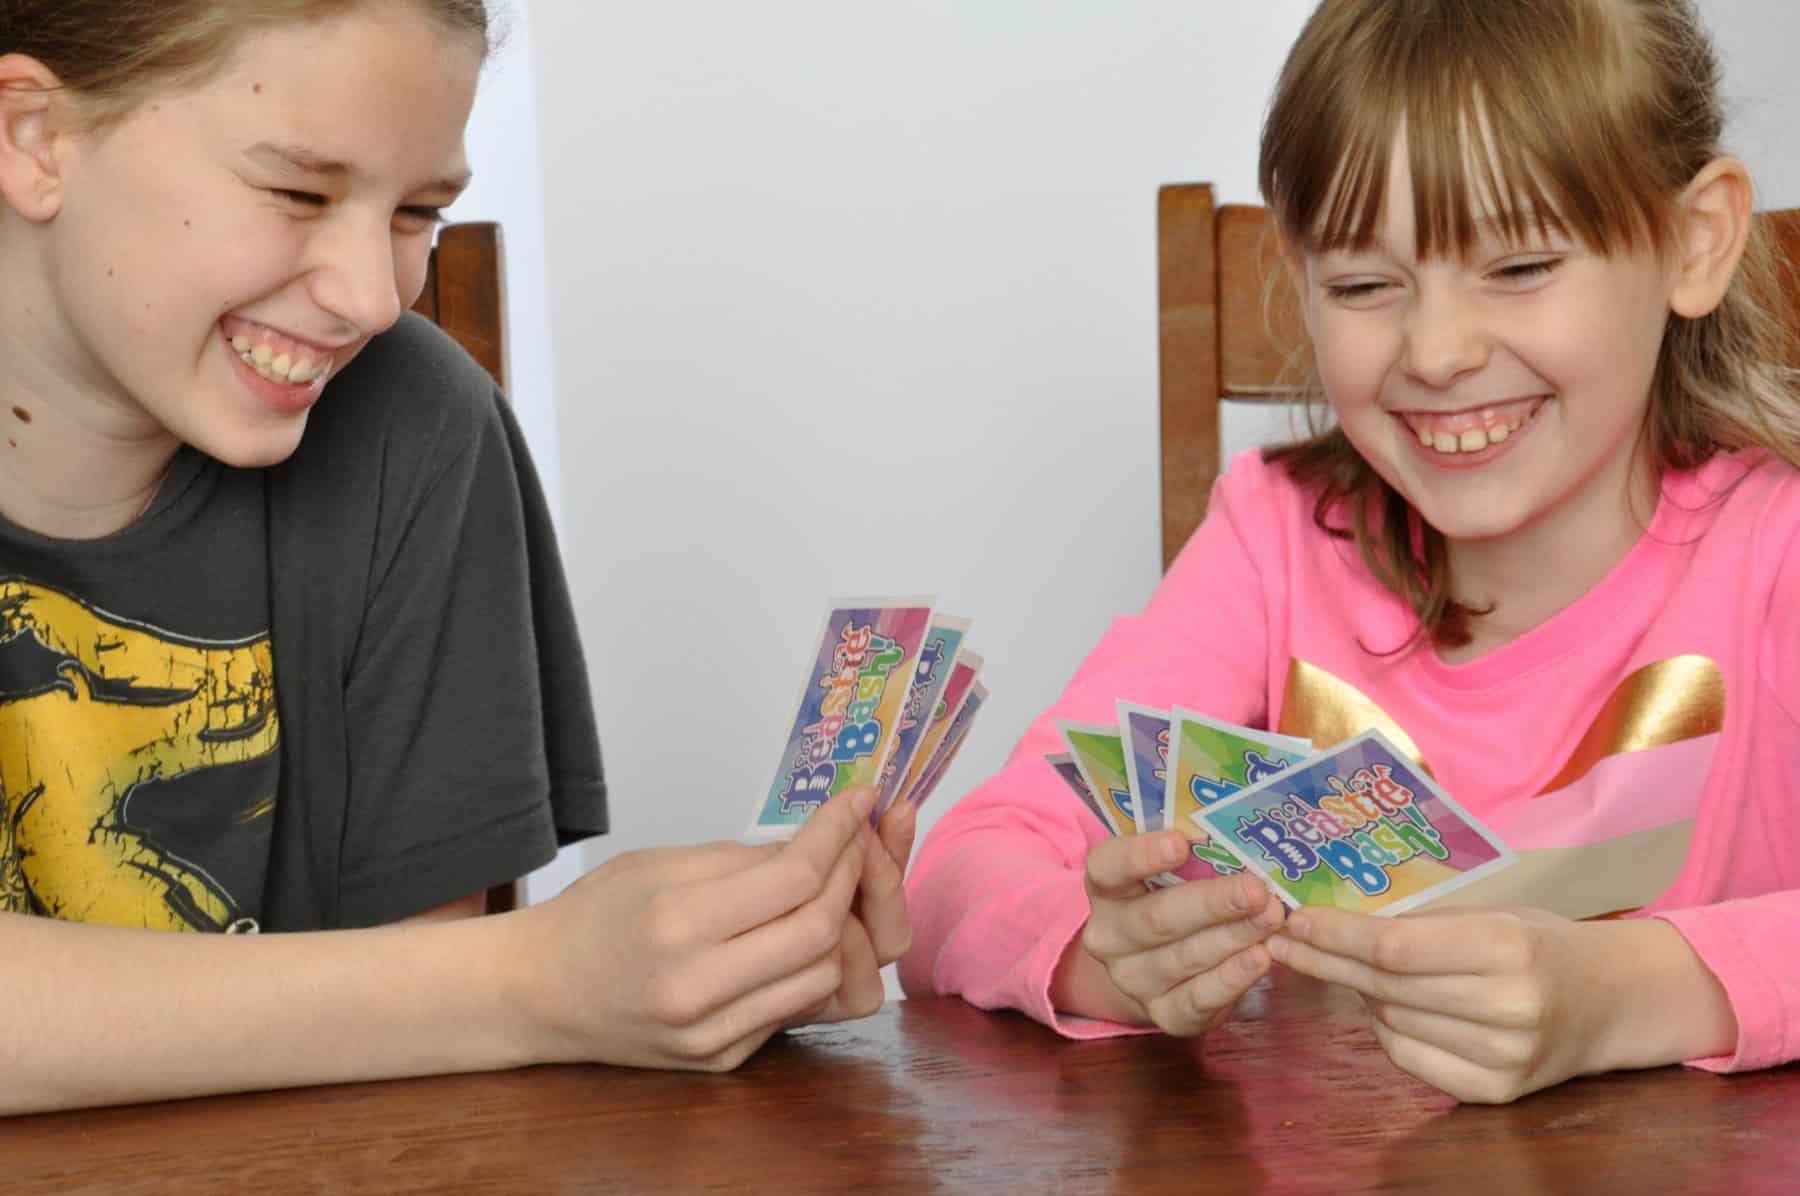 20 Super Fun Family Card Games with a Standard Deck - Print Today!